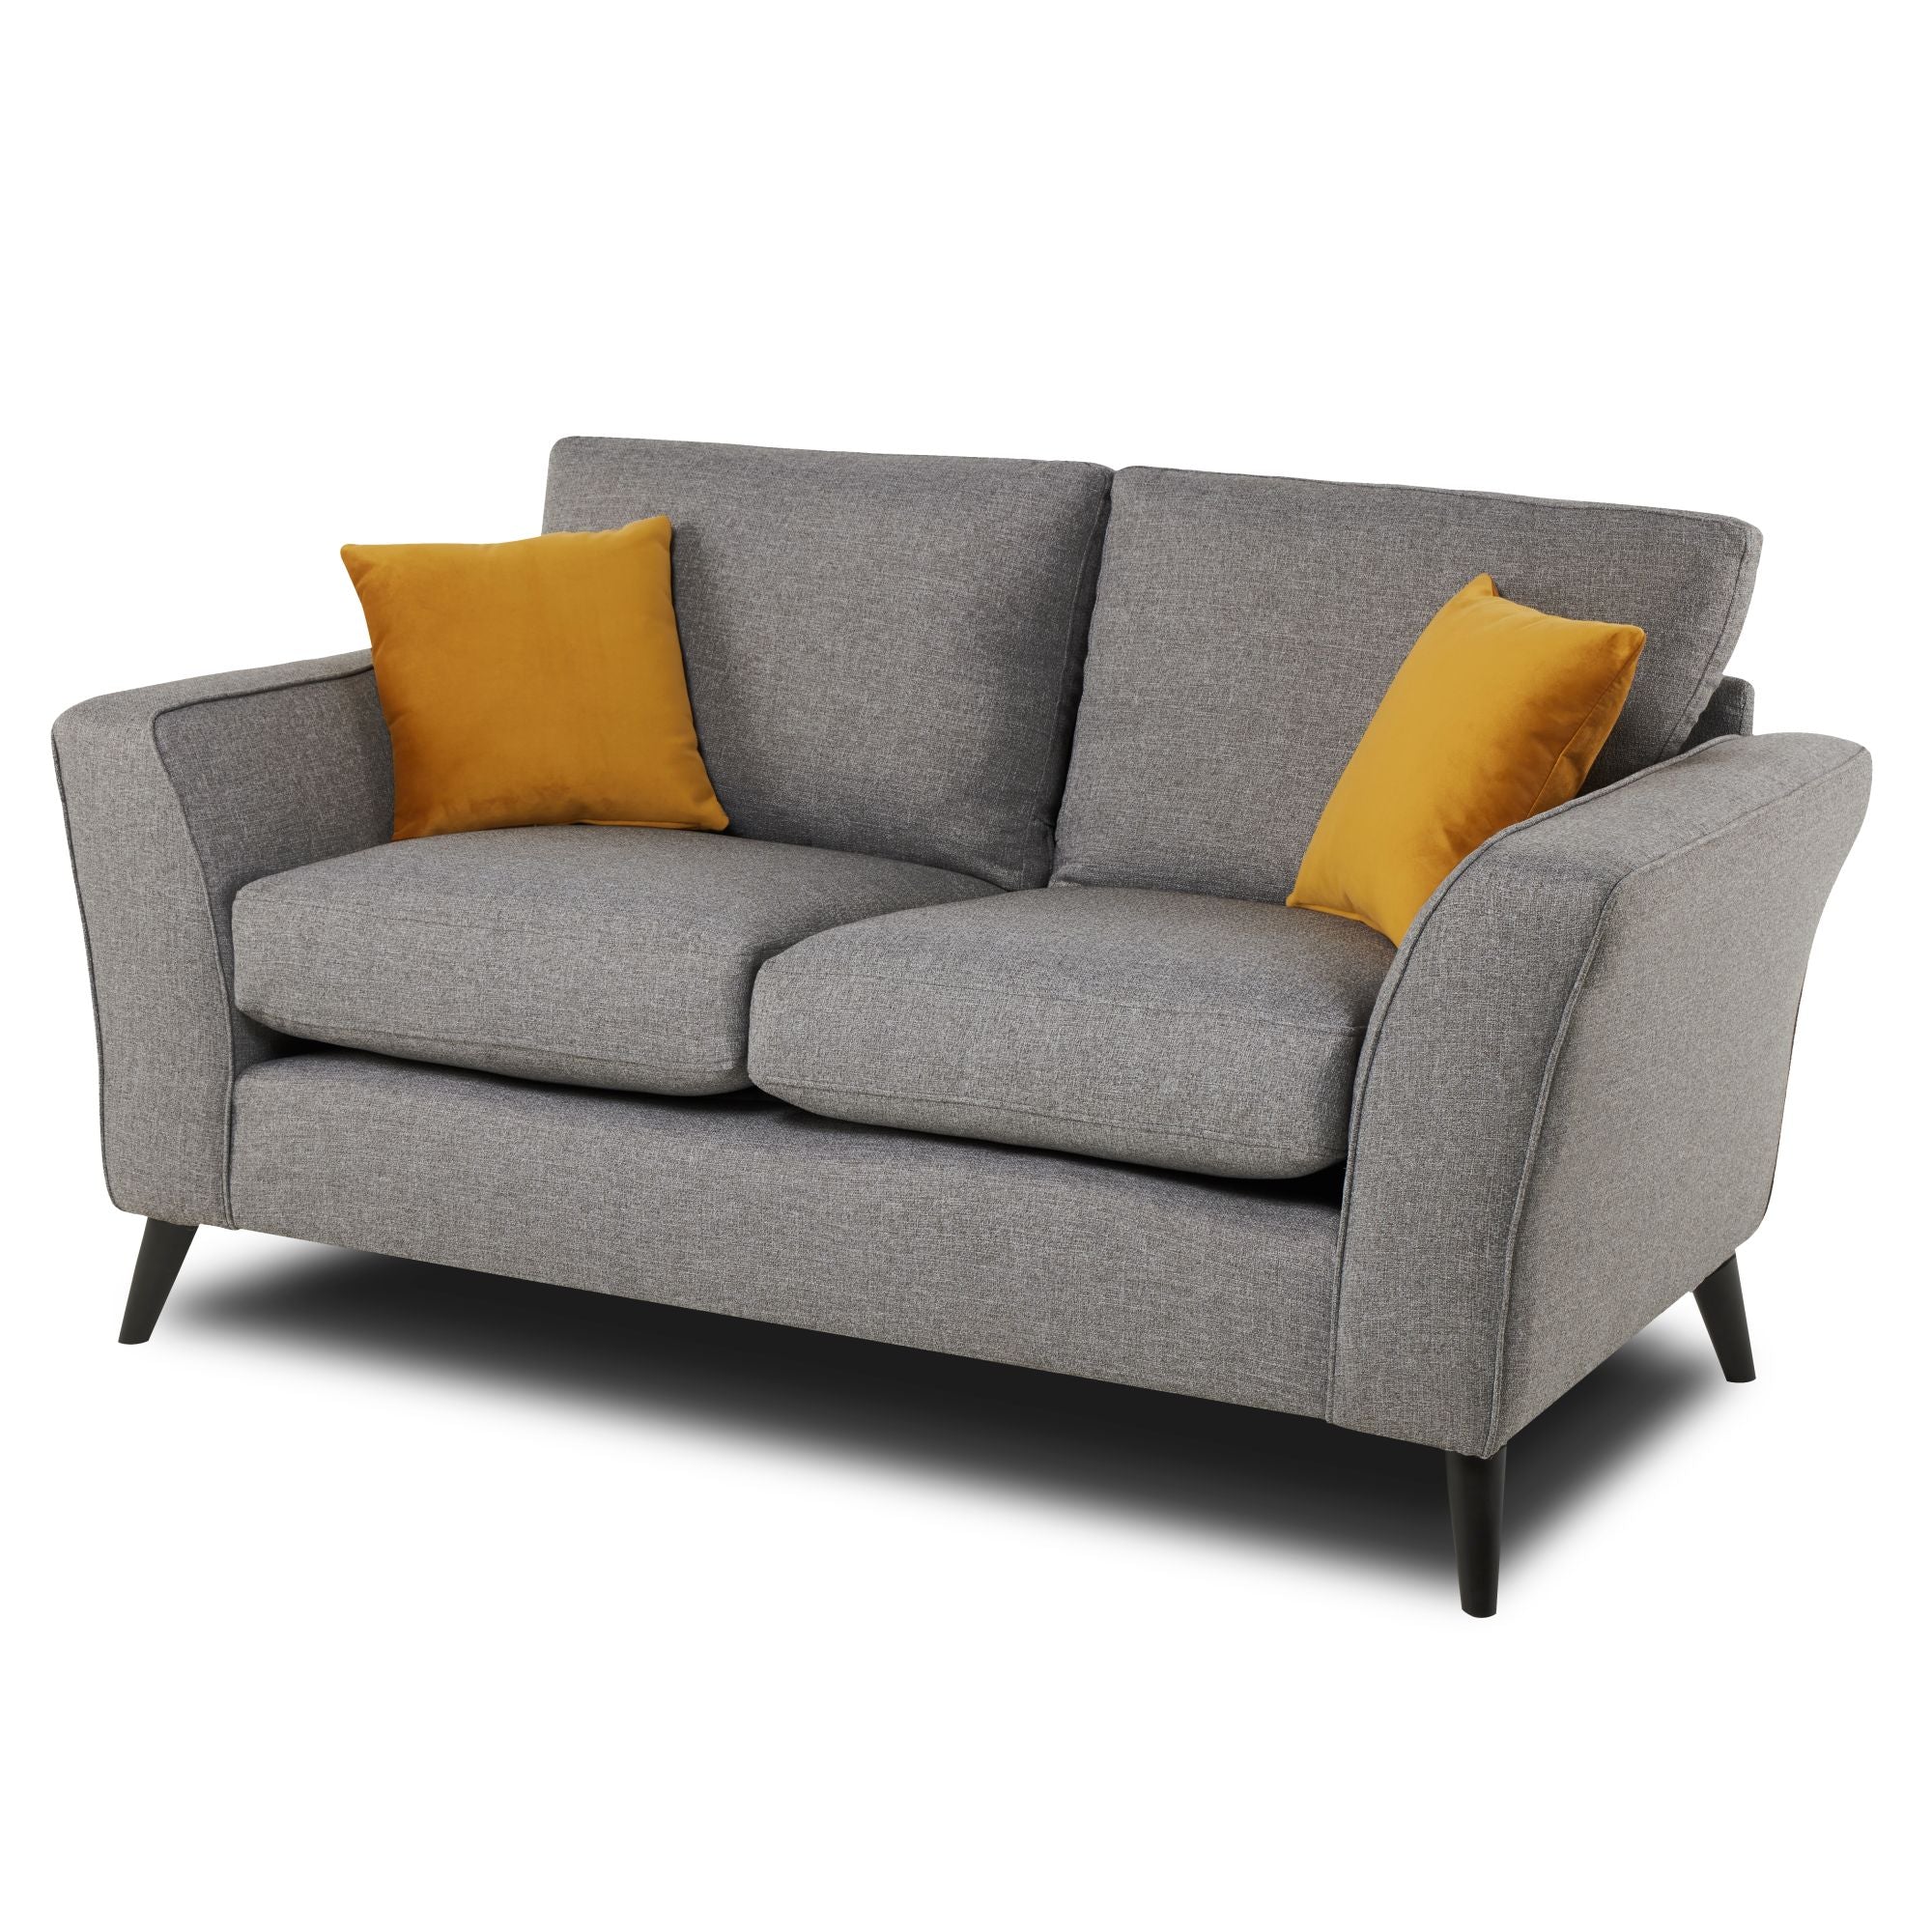 Libby 2 seater sofa in charcoal on raised black legs white background on slight left angle